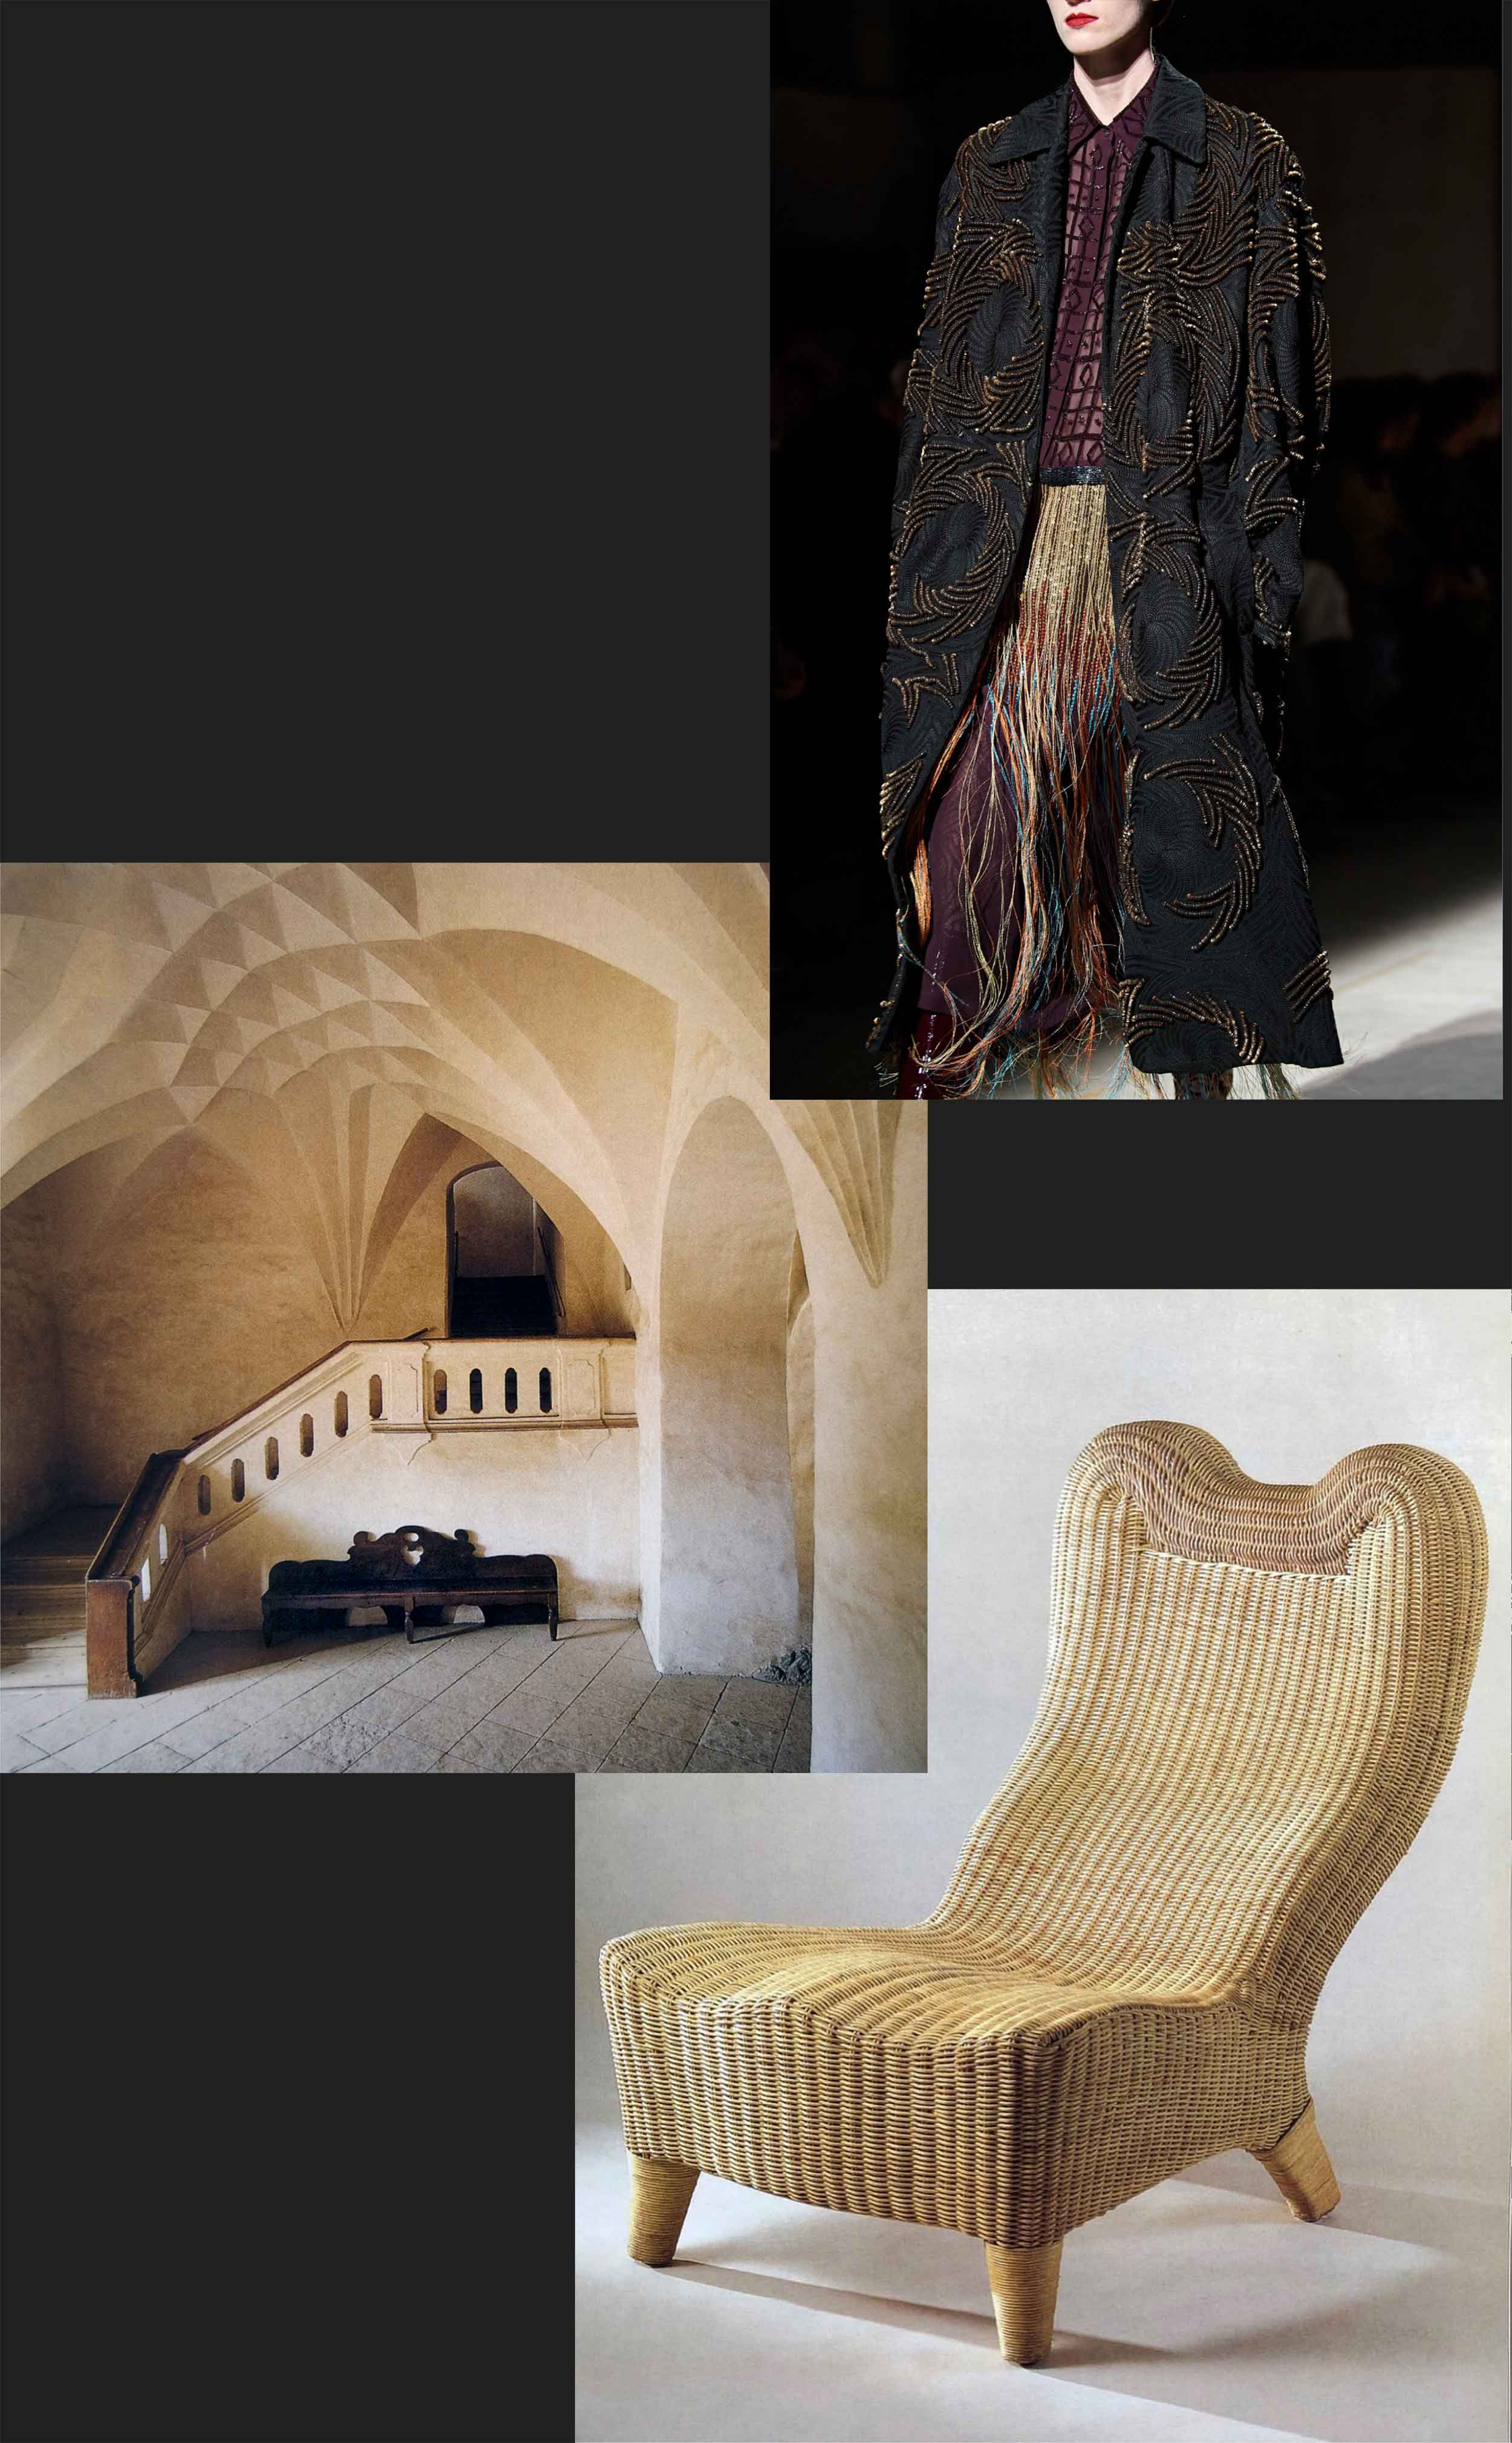 Collage of three photos: fashion model on a runway in a dark coat, a vast interior with carved patterned ceiling, and a sculptural wicker chair